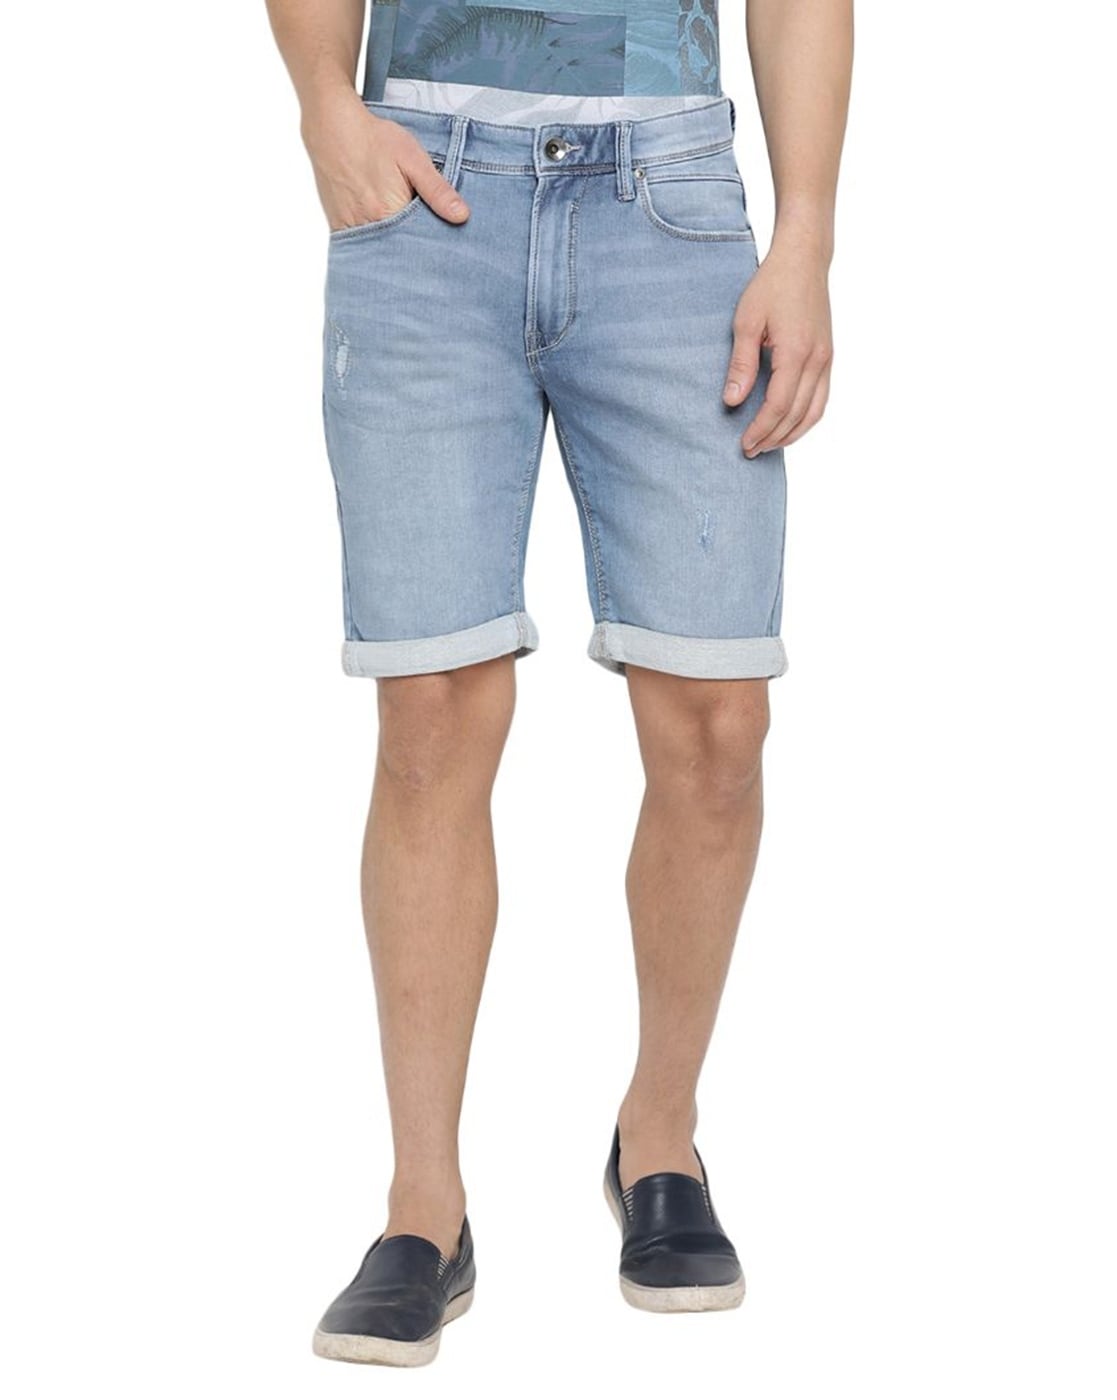 shorts pepe jeans